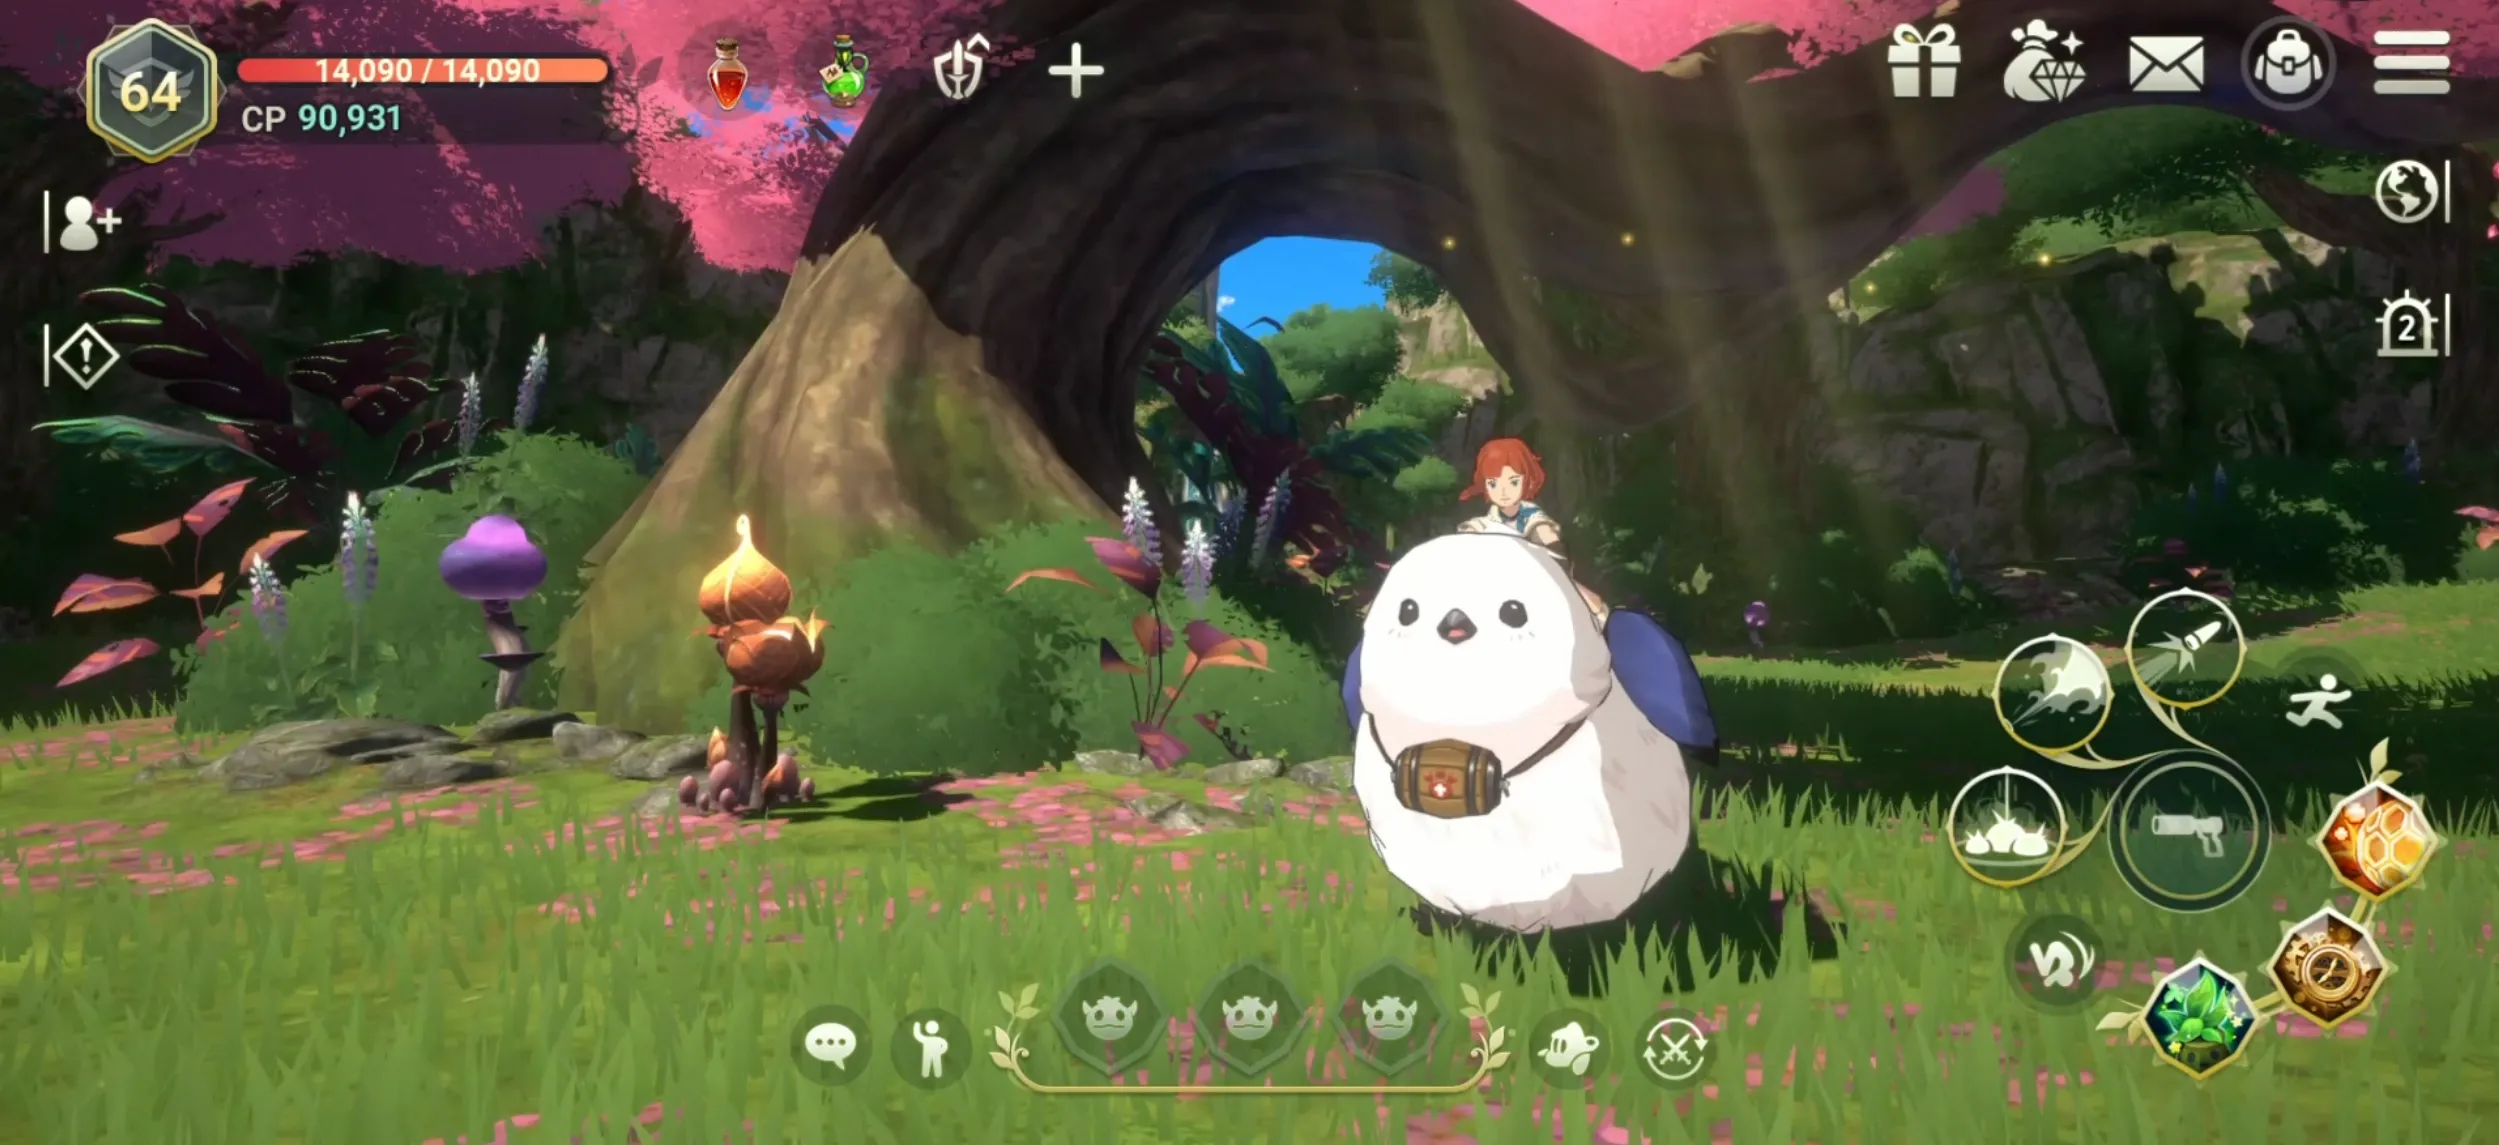 Familiar creatures are devoted friends who may assist the players in battle. Players can acquire familiars by discovering and taming them, or by hatching familiar eggs.